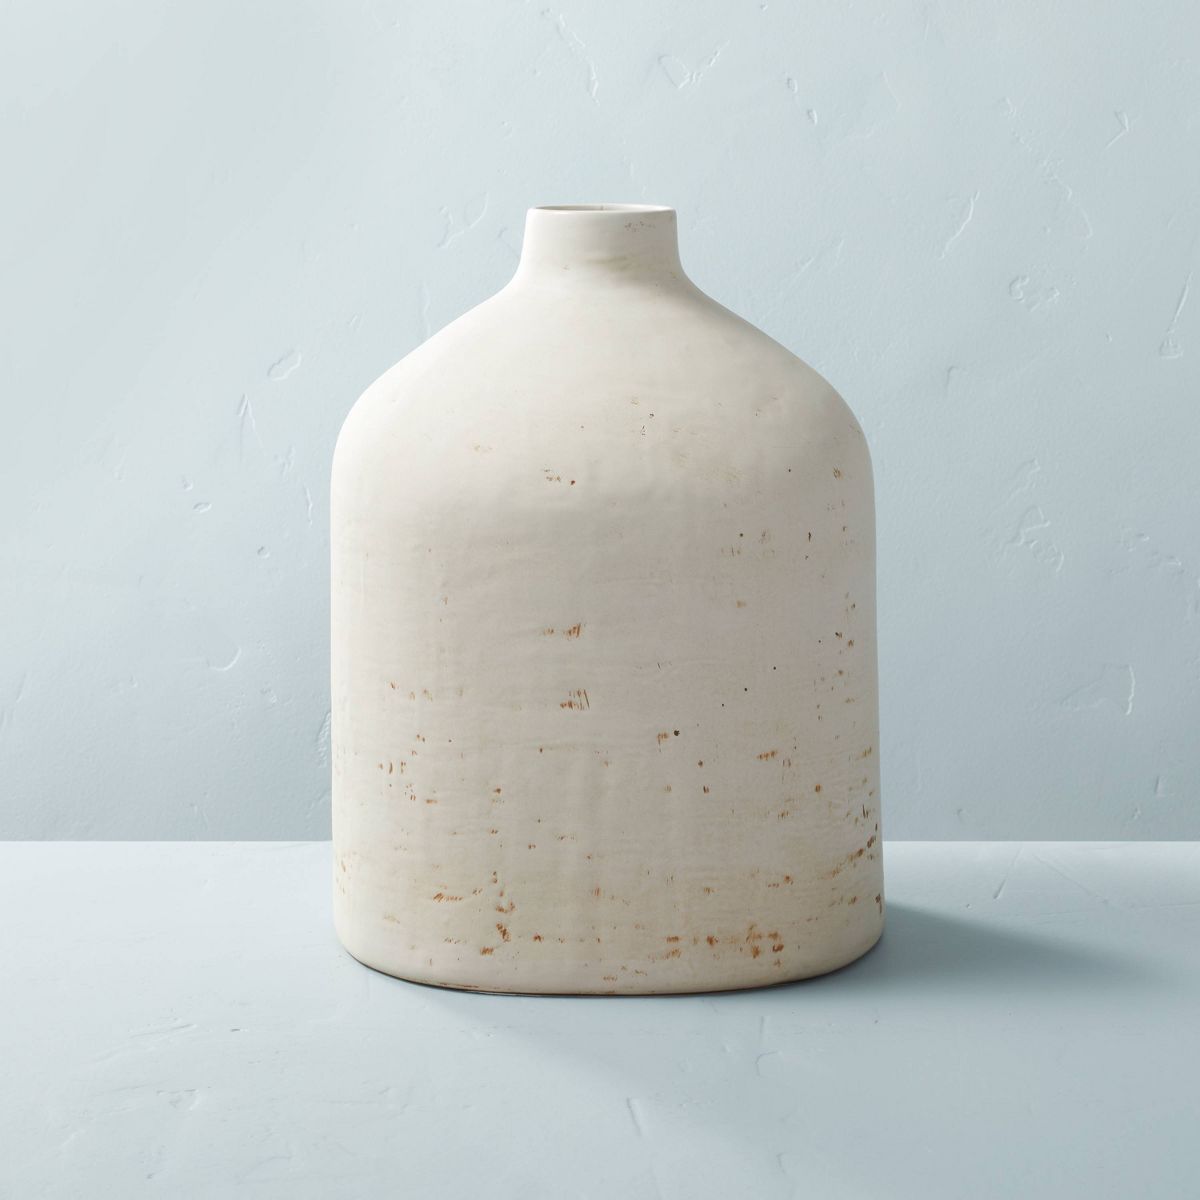 Target/Home/Home Decor/Decorative Objects/Vases‎ | Target